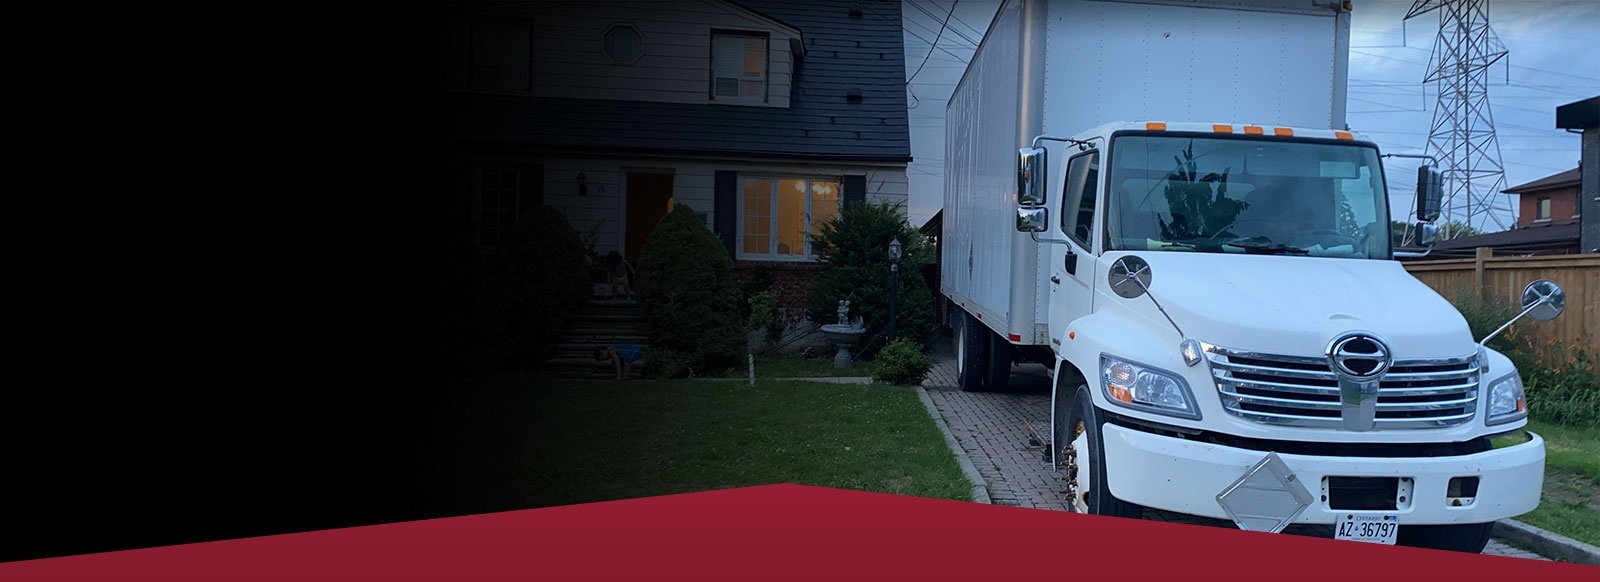 Long Distance Moving Services in Toronto, Ontario offered by Coraza Movers